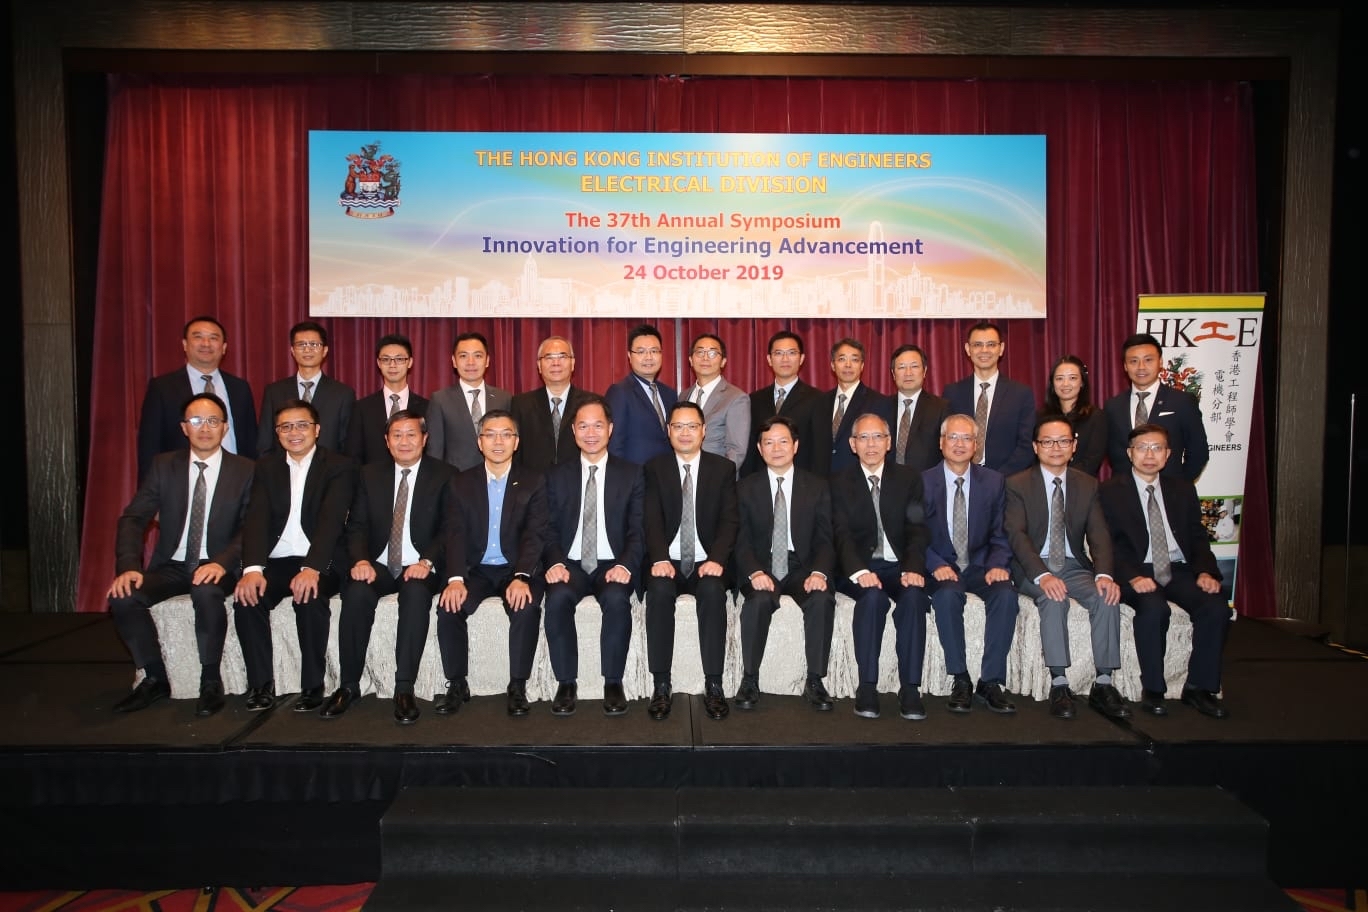 Candy (back row, second from right) joined the annual symposium of the Hong Kong Institution of Engineers in 2019 to discuss innovation alongside other industry practitioners